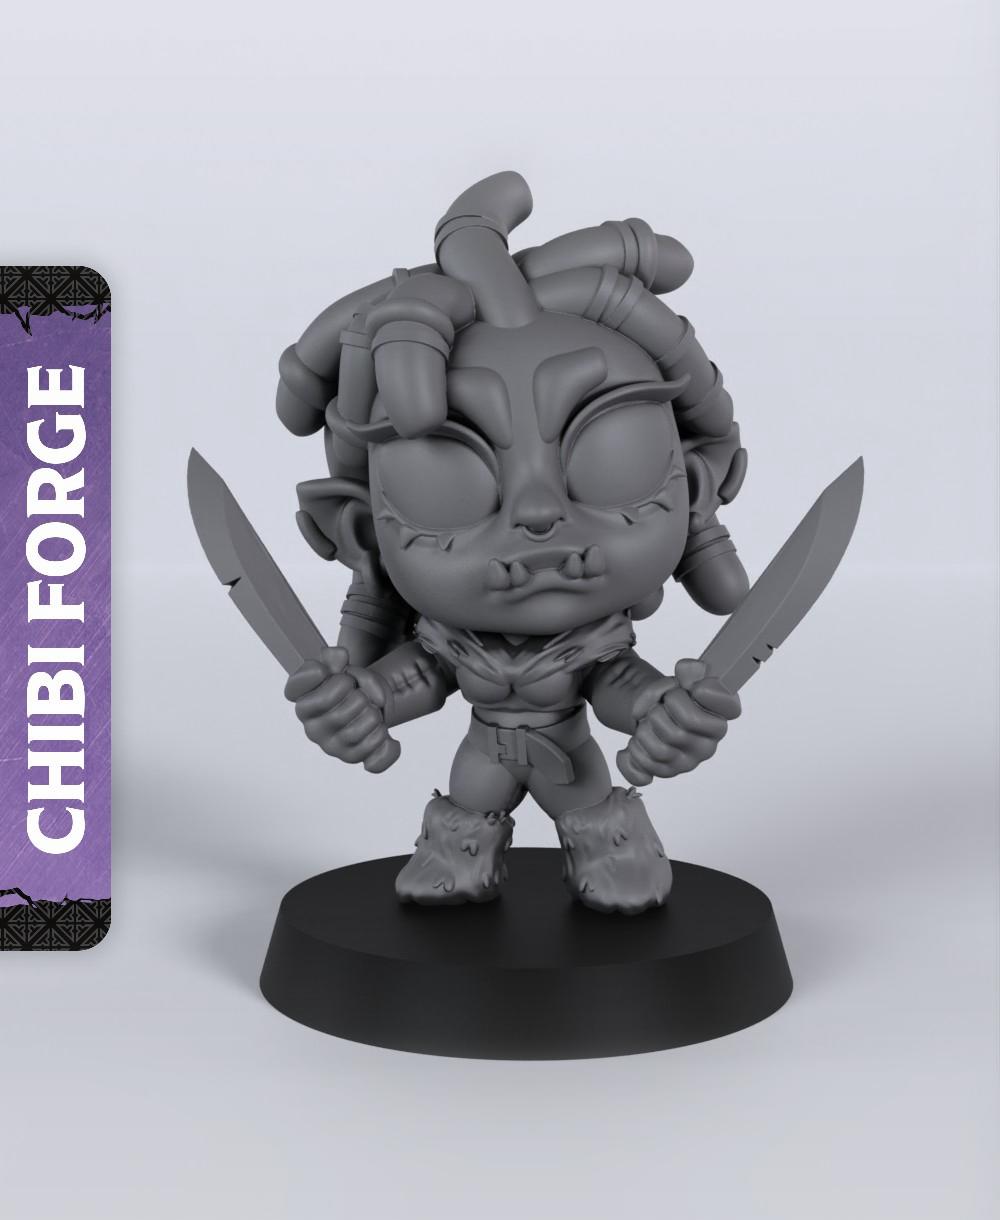 Female Half-Orc Fighter - With Free Dragon Warhammer - 5e DnD Inspired for RPG and Wargamers 3d model